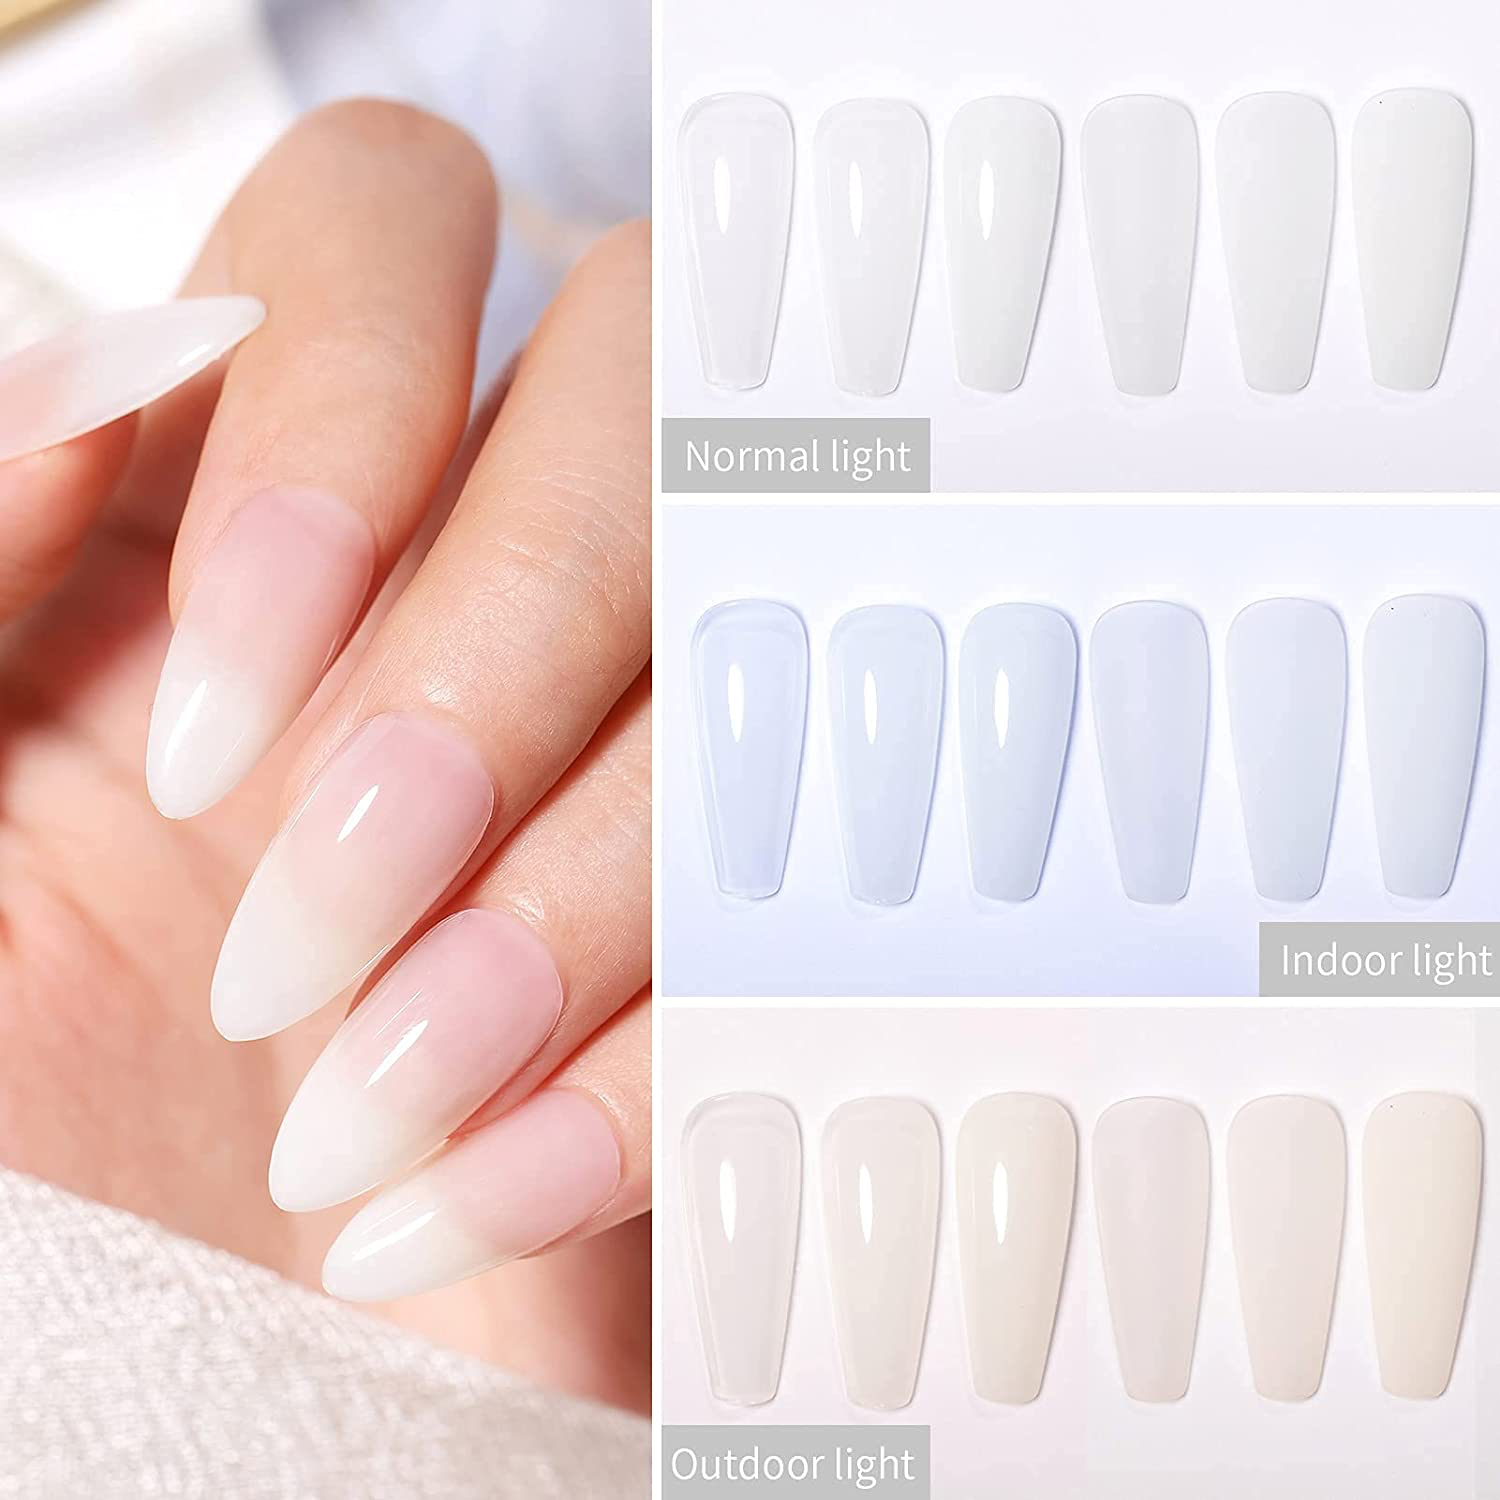 How to Make Gel Nail Strips Last Longer: Tips to Make the Most of Your Wraps